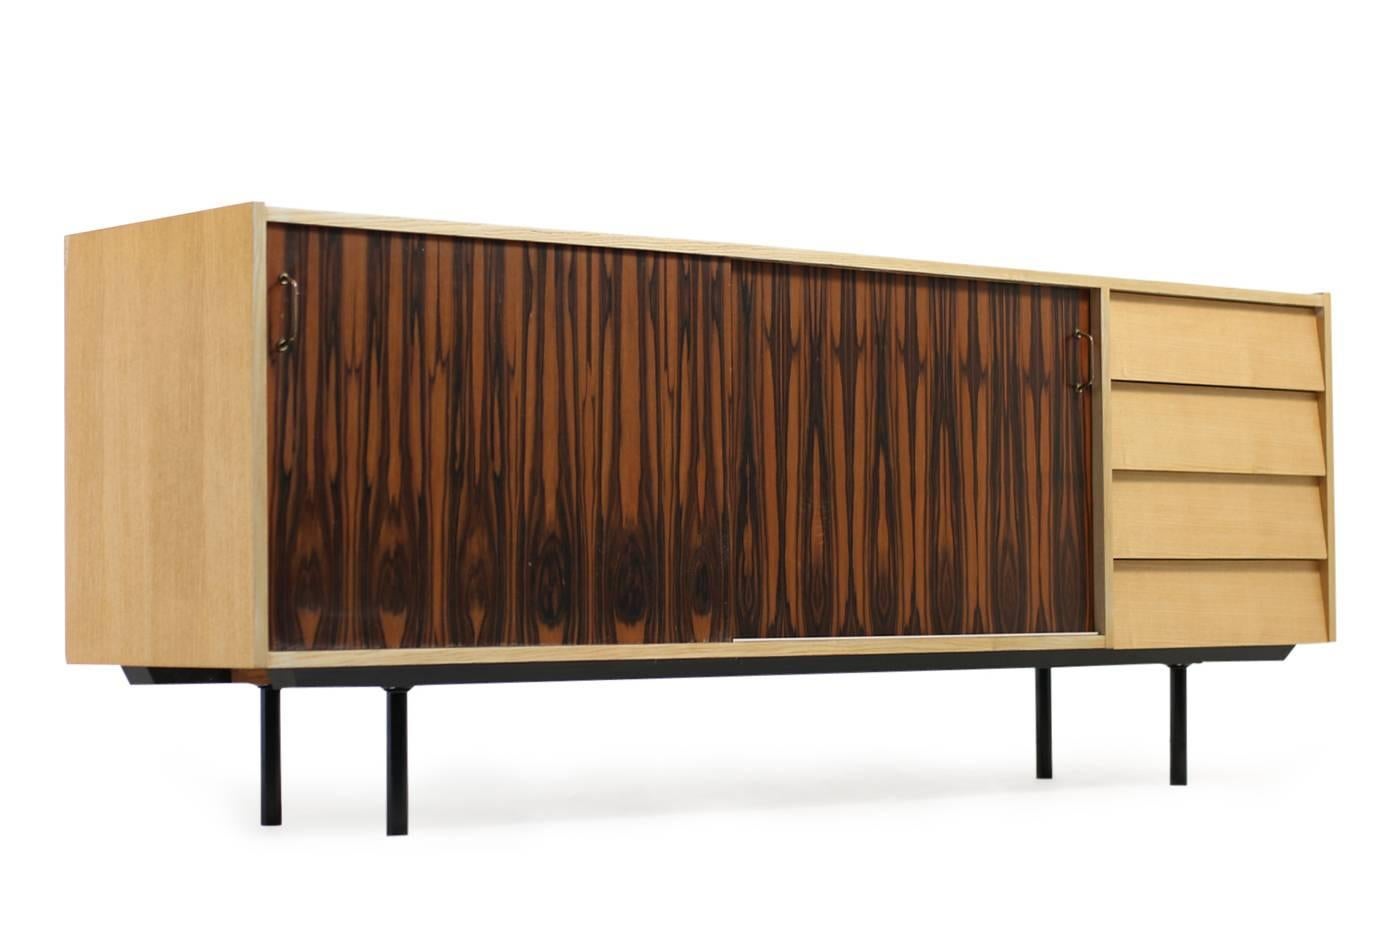 1950s Oak Sideboard Mid-Century Modern Design with Drawers Brass Handles For Sale 1